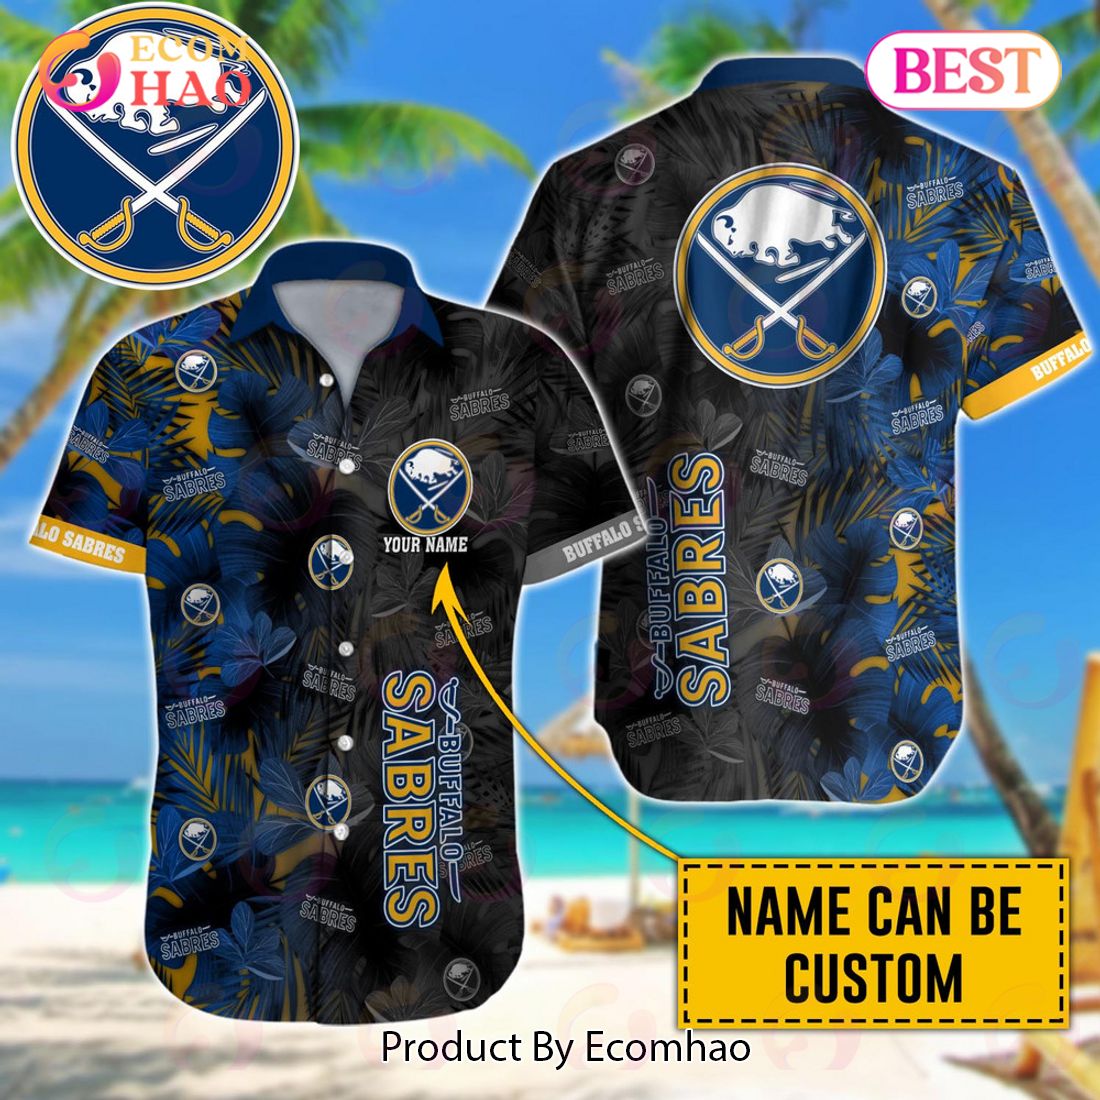 Personalized Buffalo Sabres 80s 90s Away Vintage NHL Throwback